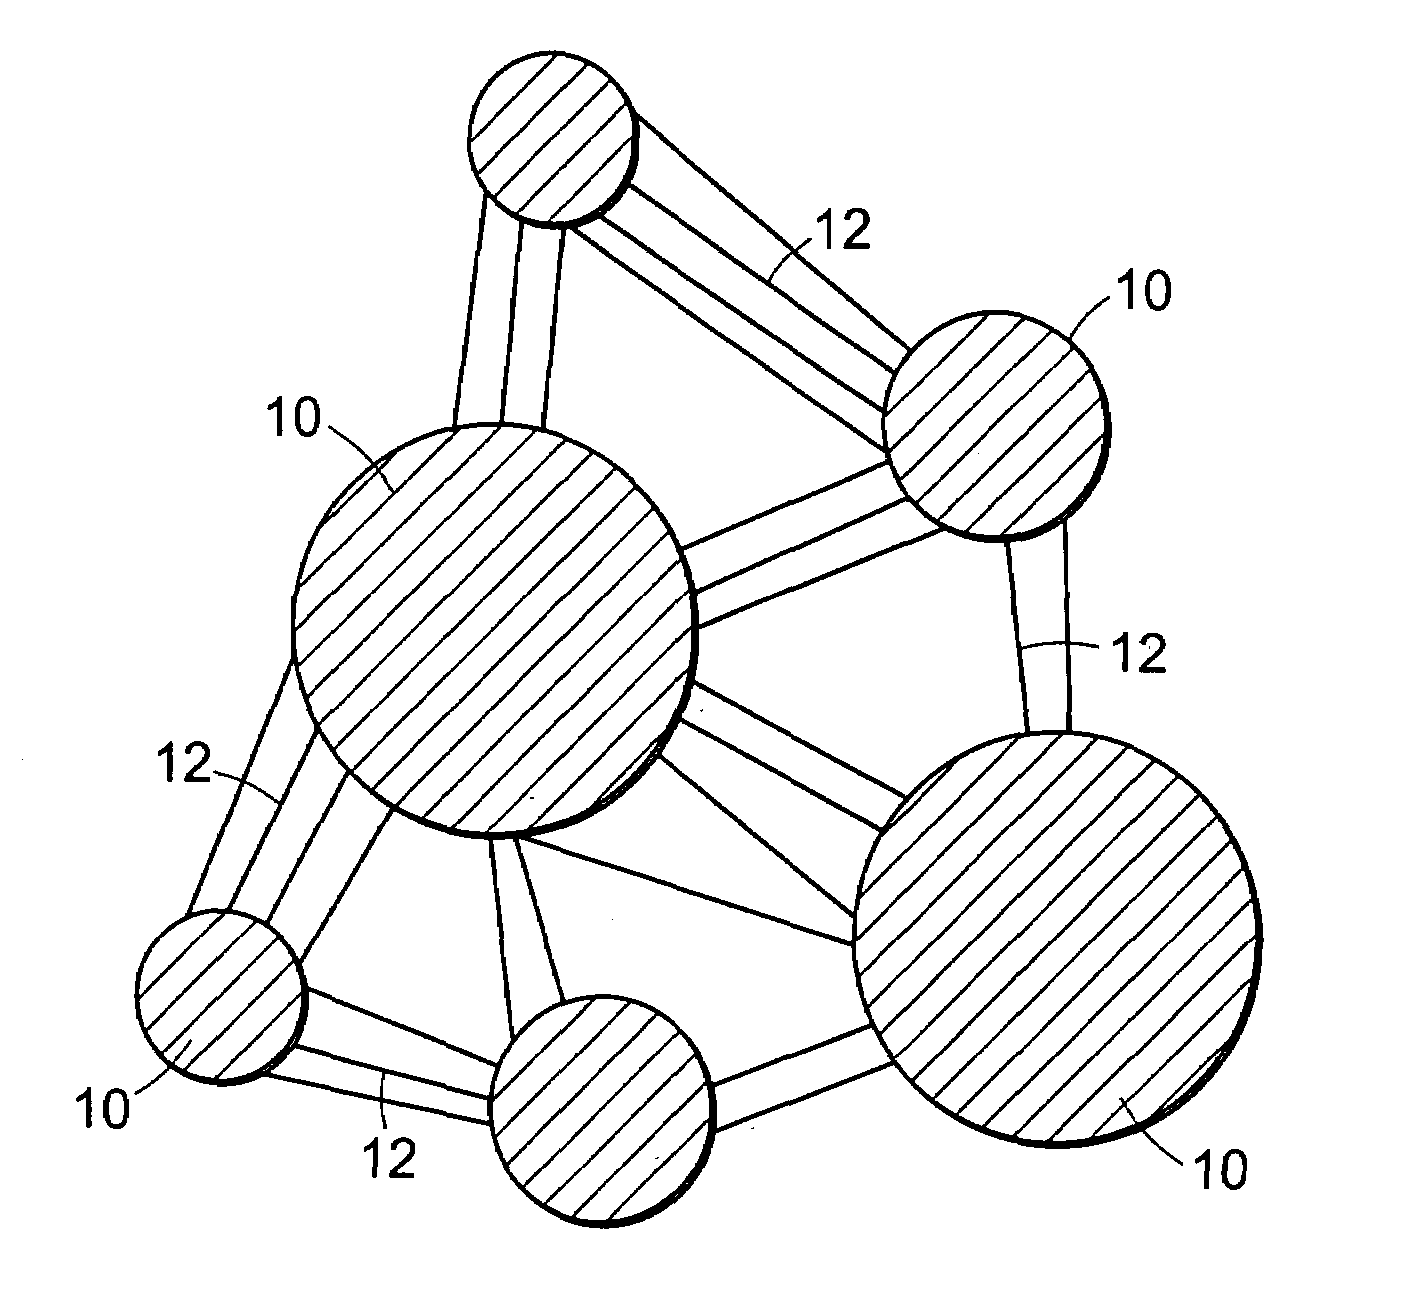 PTFE material with aggregations of nodes